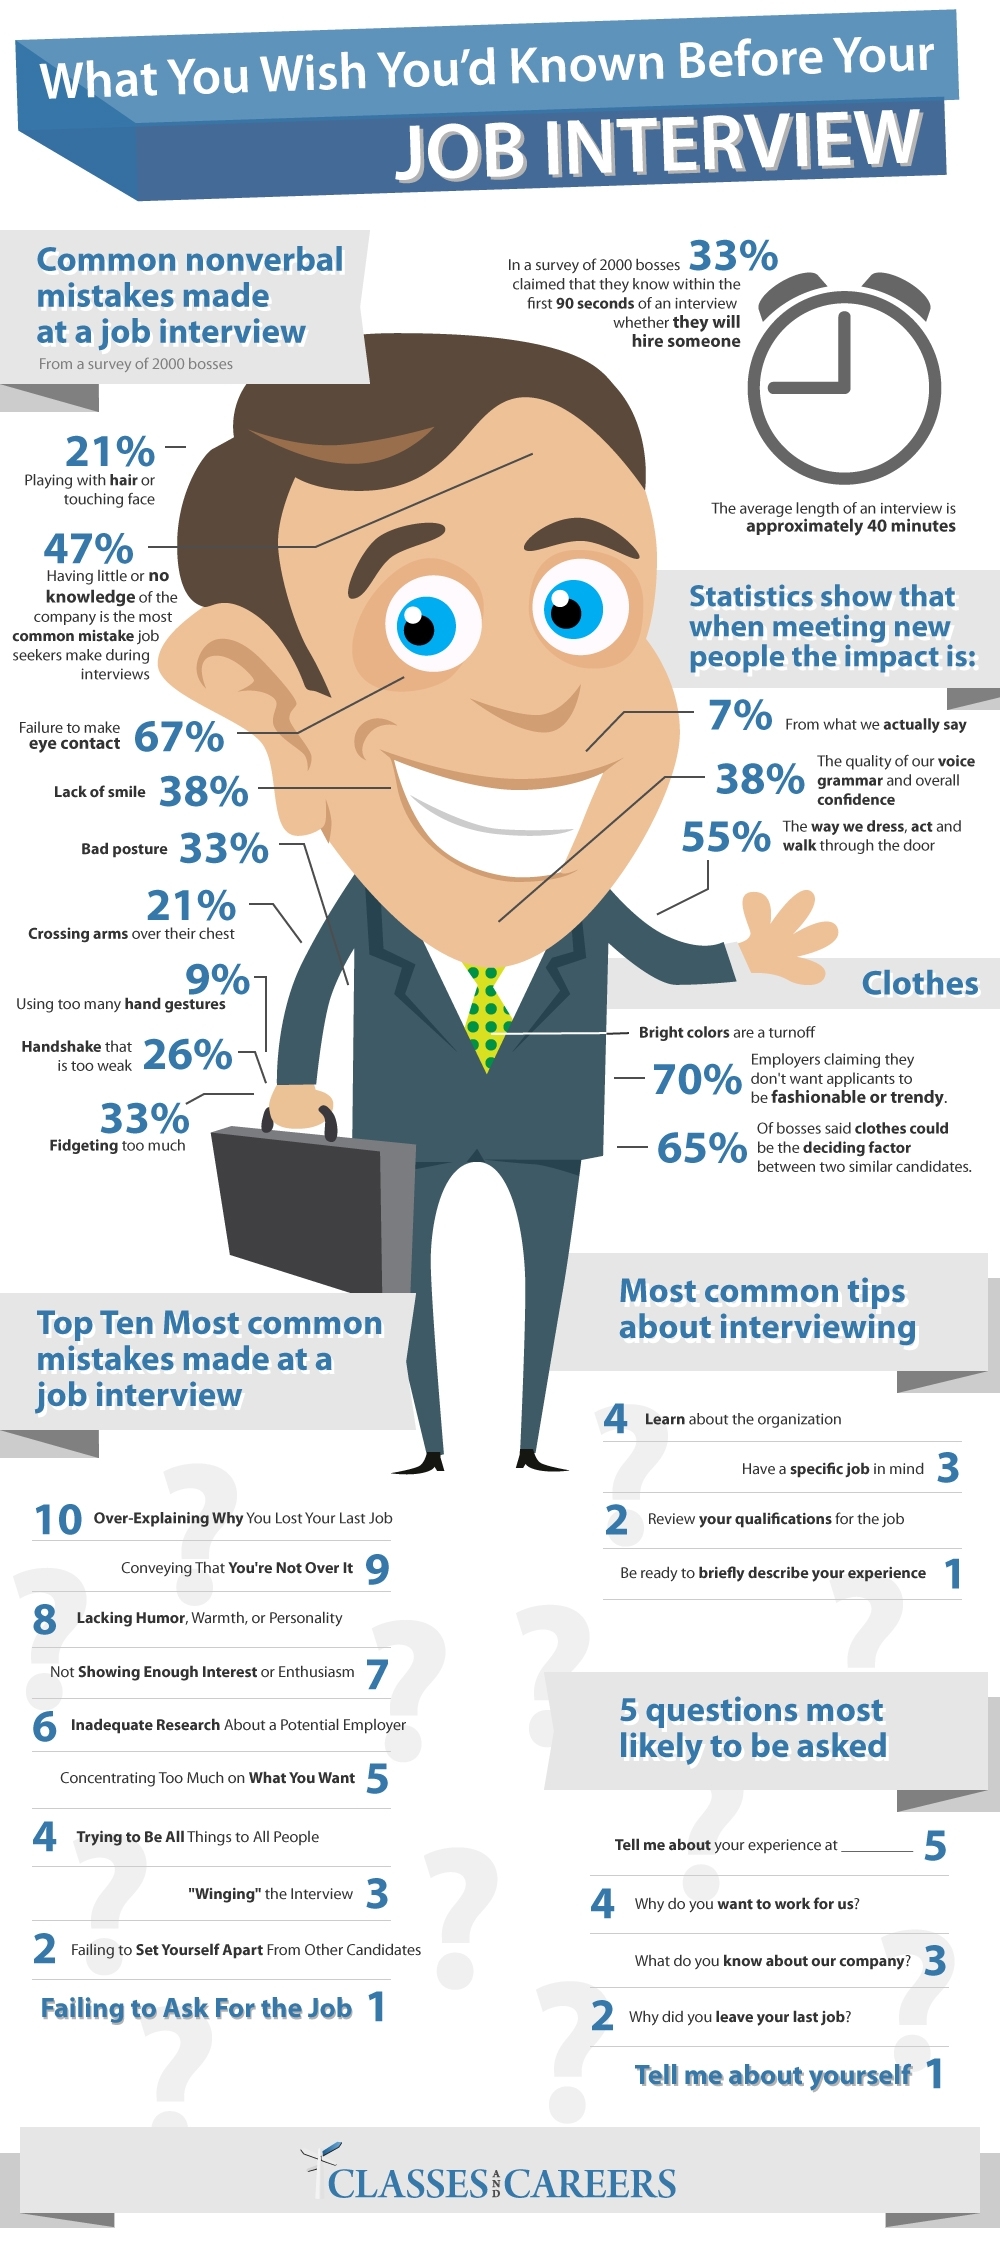 Tips for job interviews